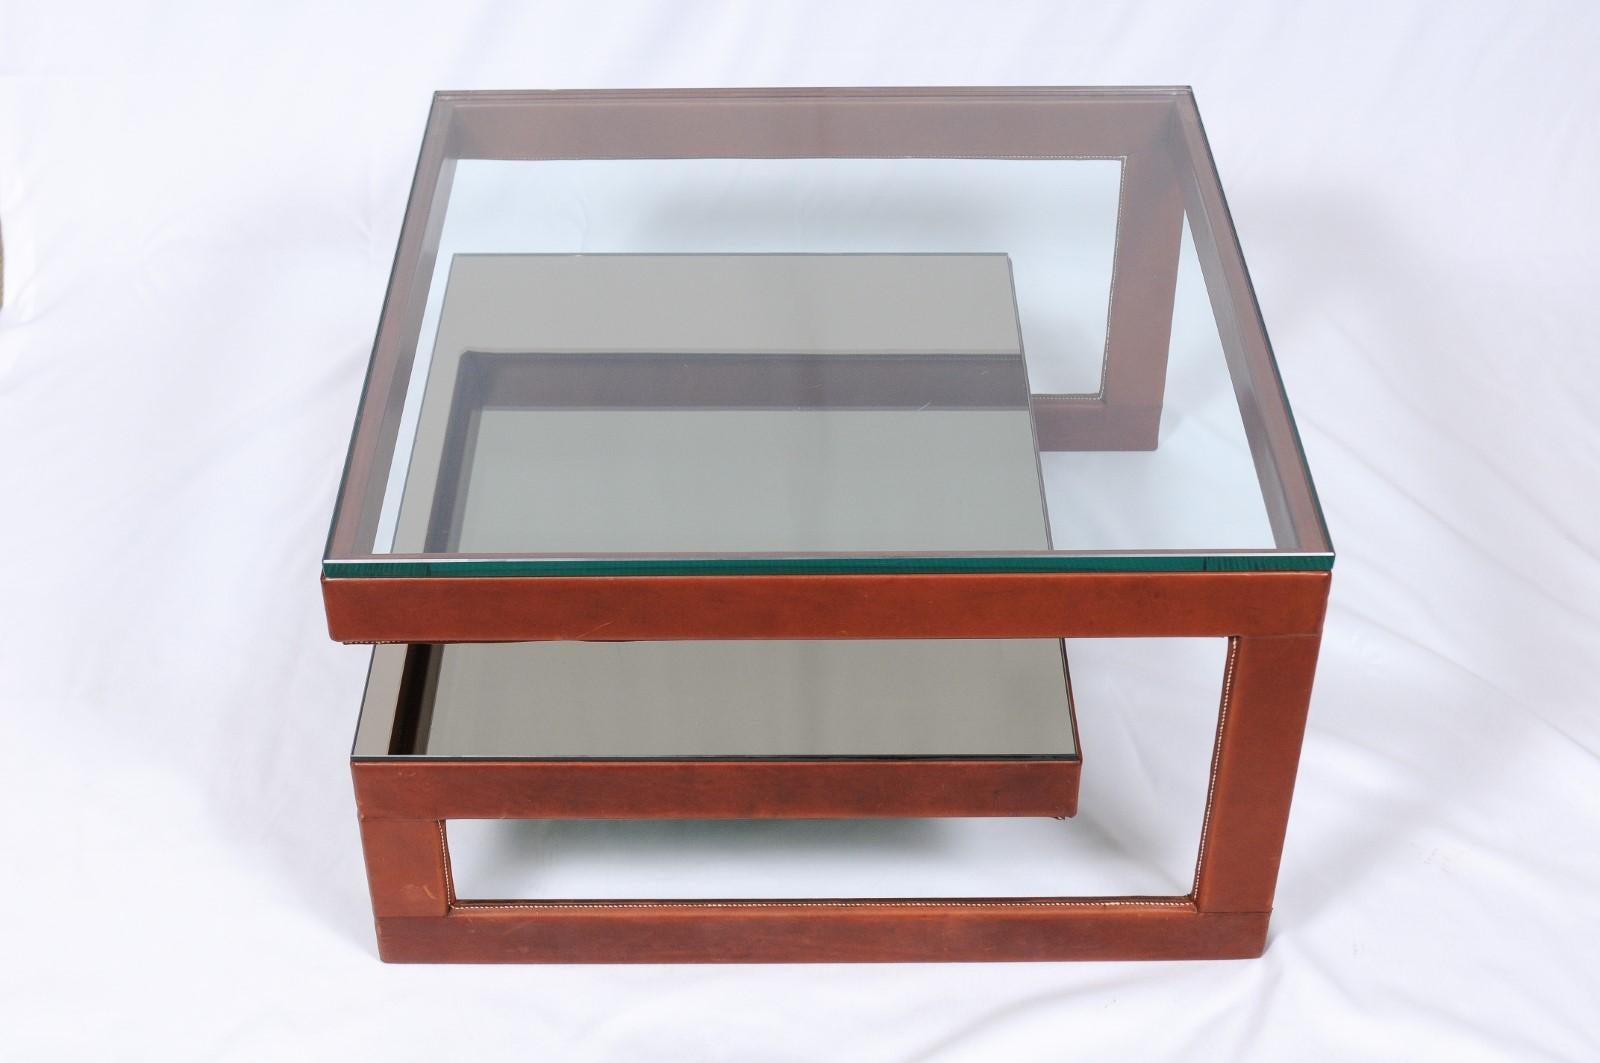 Architectural and sculptural, this coffee table is both simple and layered. Glass and leather wrap in clean lines for a contemporary statement.